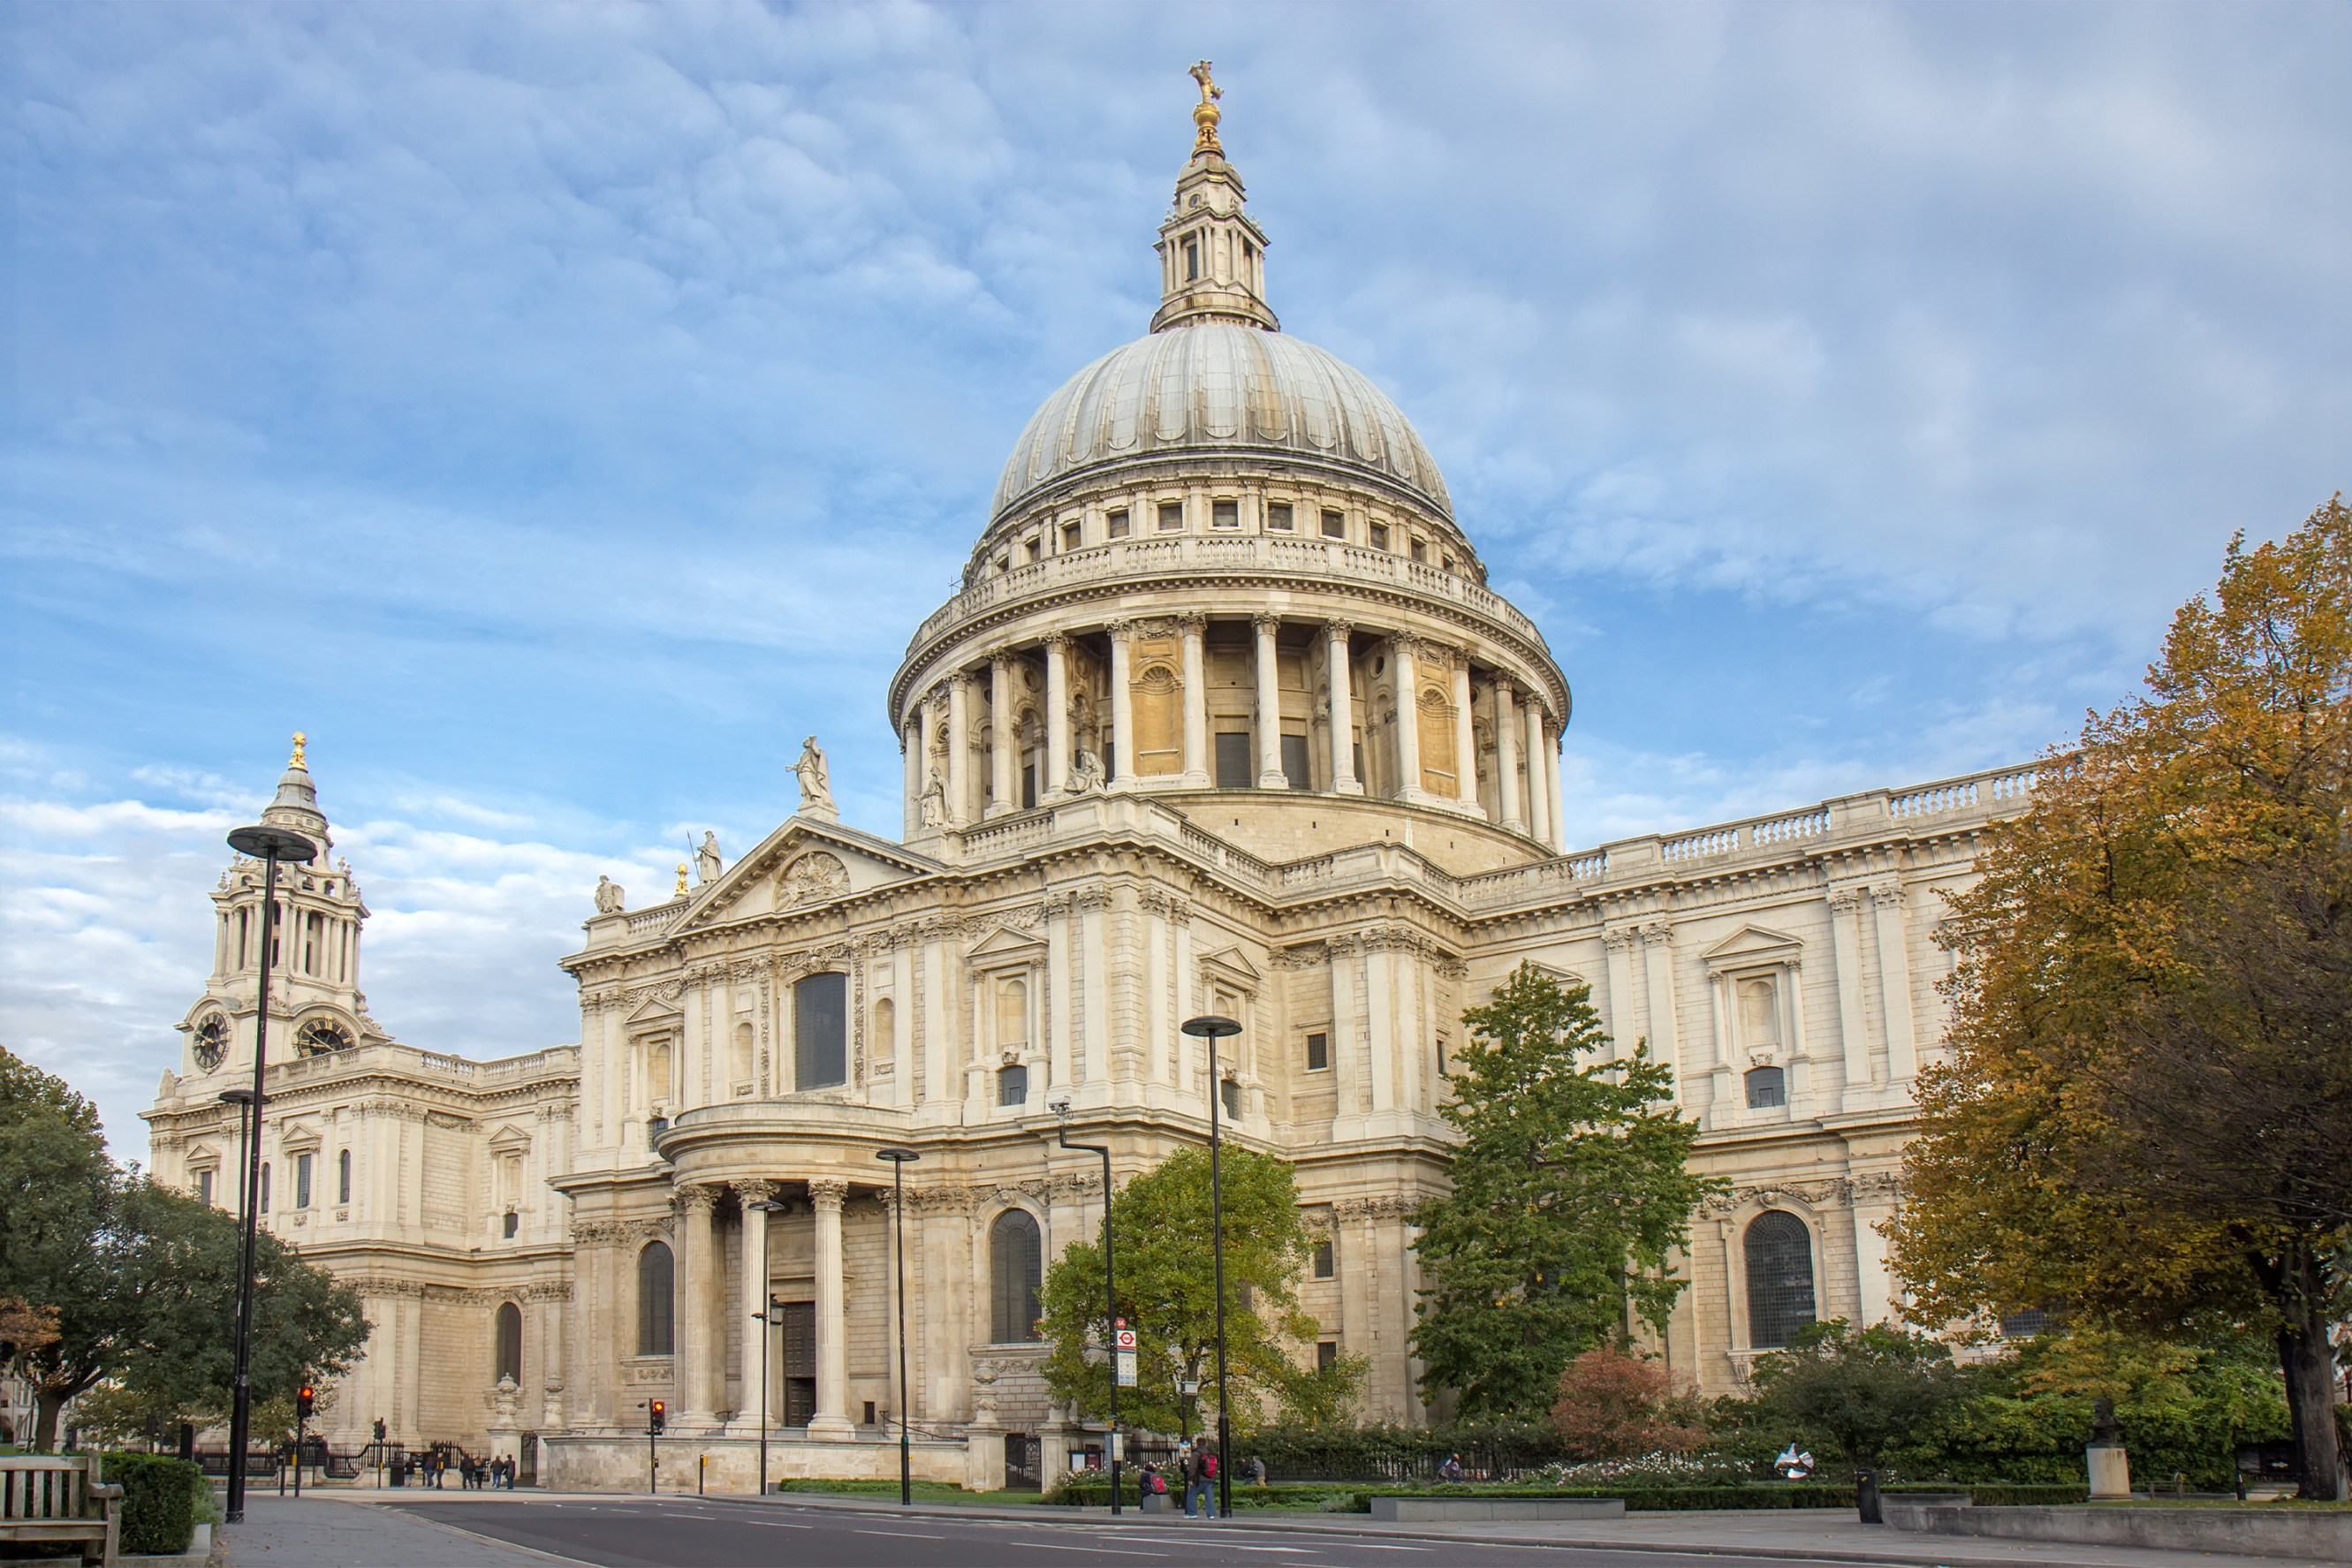 Exterior view of St Paul's Cathedral in London